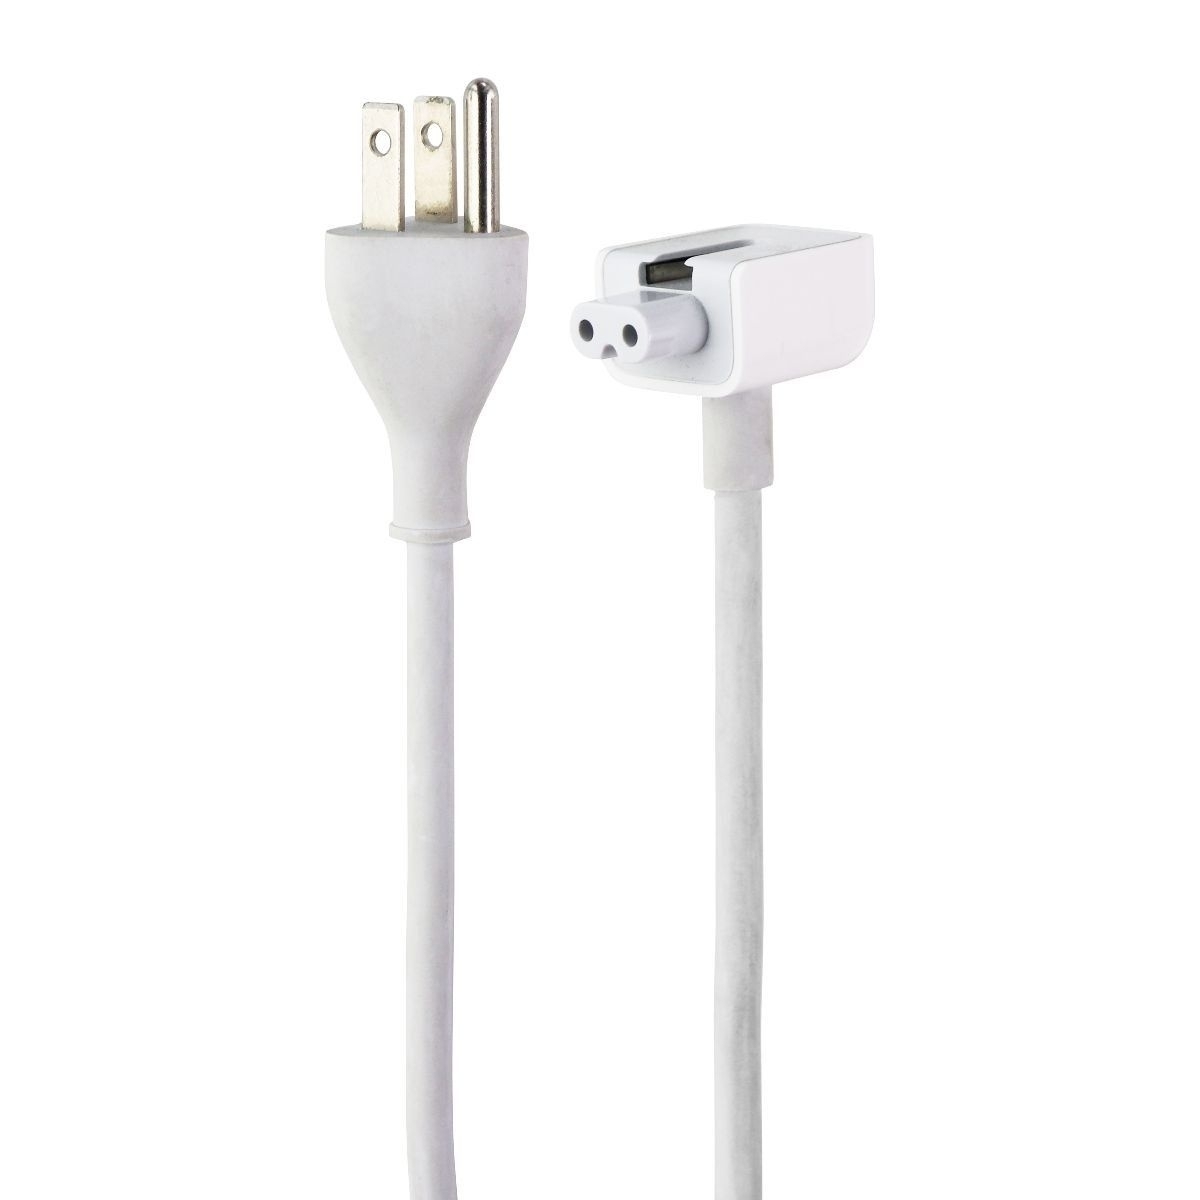 Longwell / Apple (6-Foot) MagSafe Power Cord 3-Prong Wall Cable - White (LS-7A)